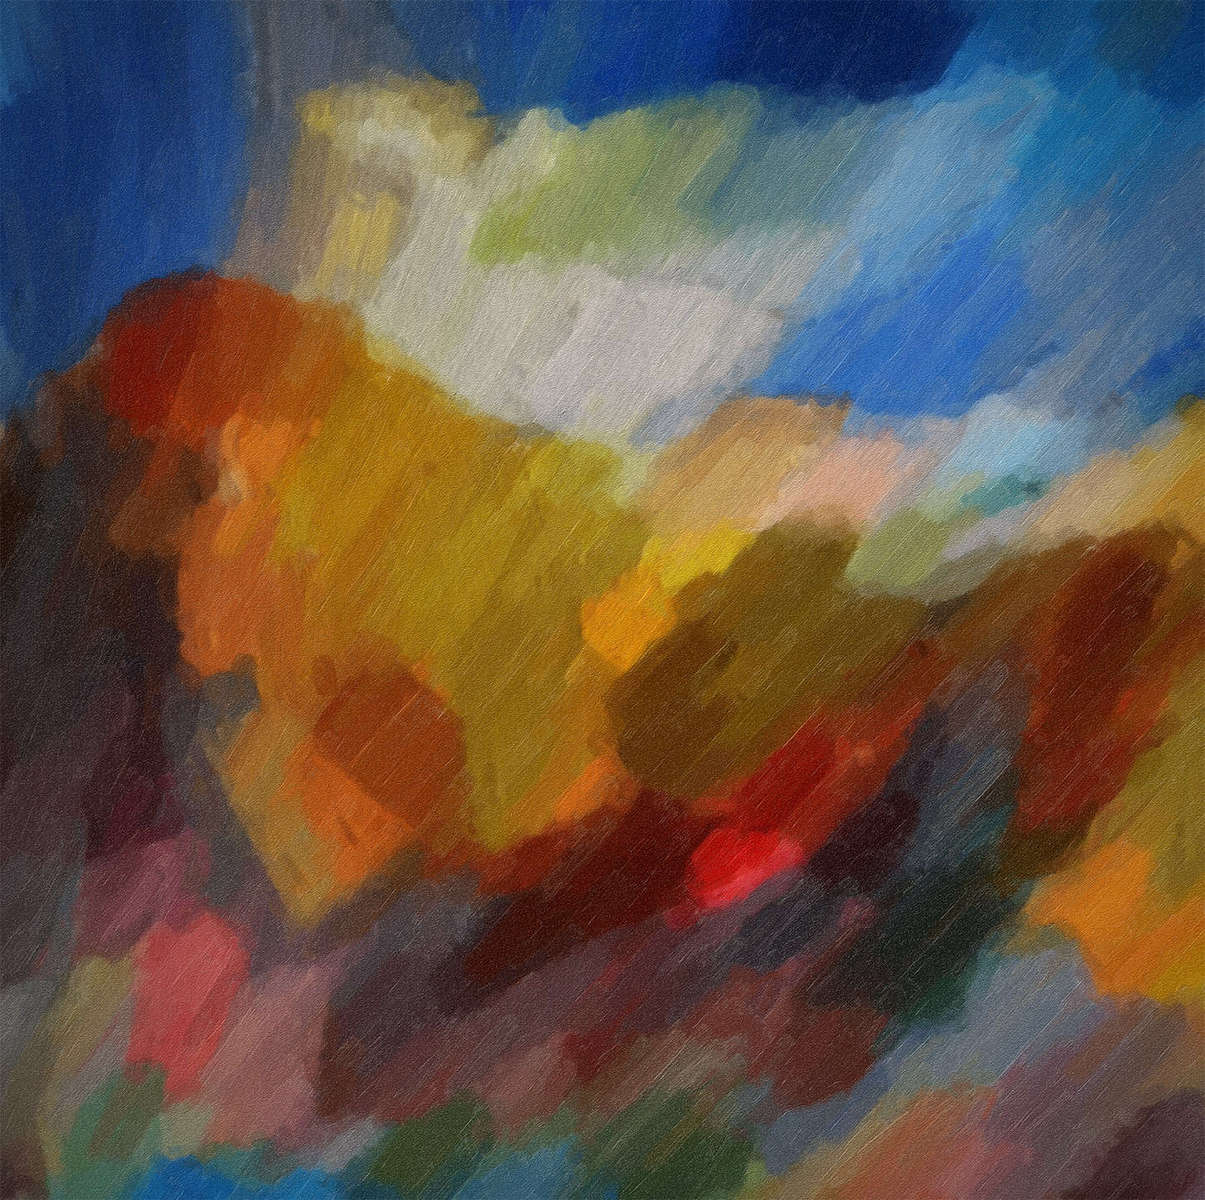 An_Autumn_Mountainscape.jpg : Section 2 : American artist digital invention archival artifact color print image emerging capture creative convergent transparency universe dream history painter Hybrid exhibition